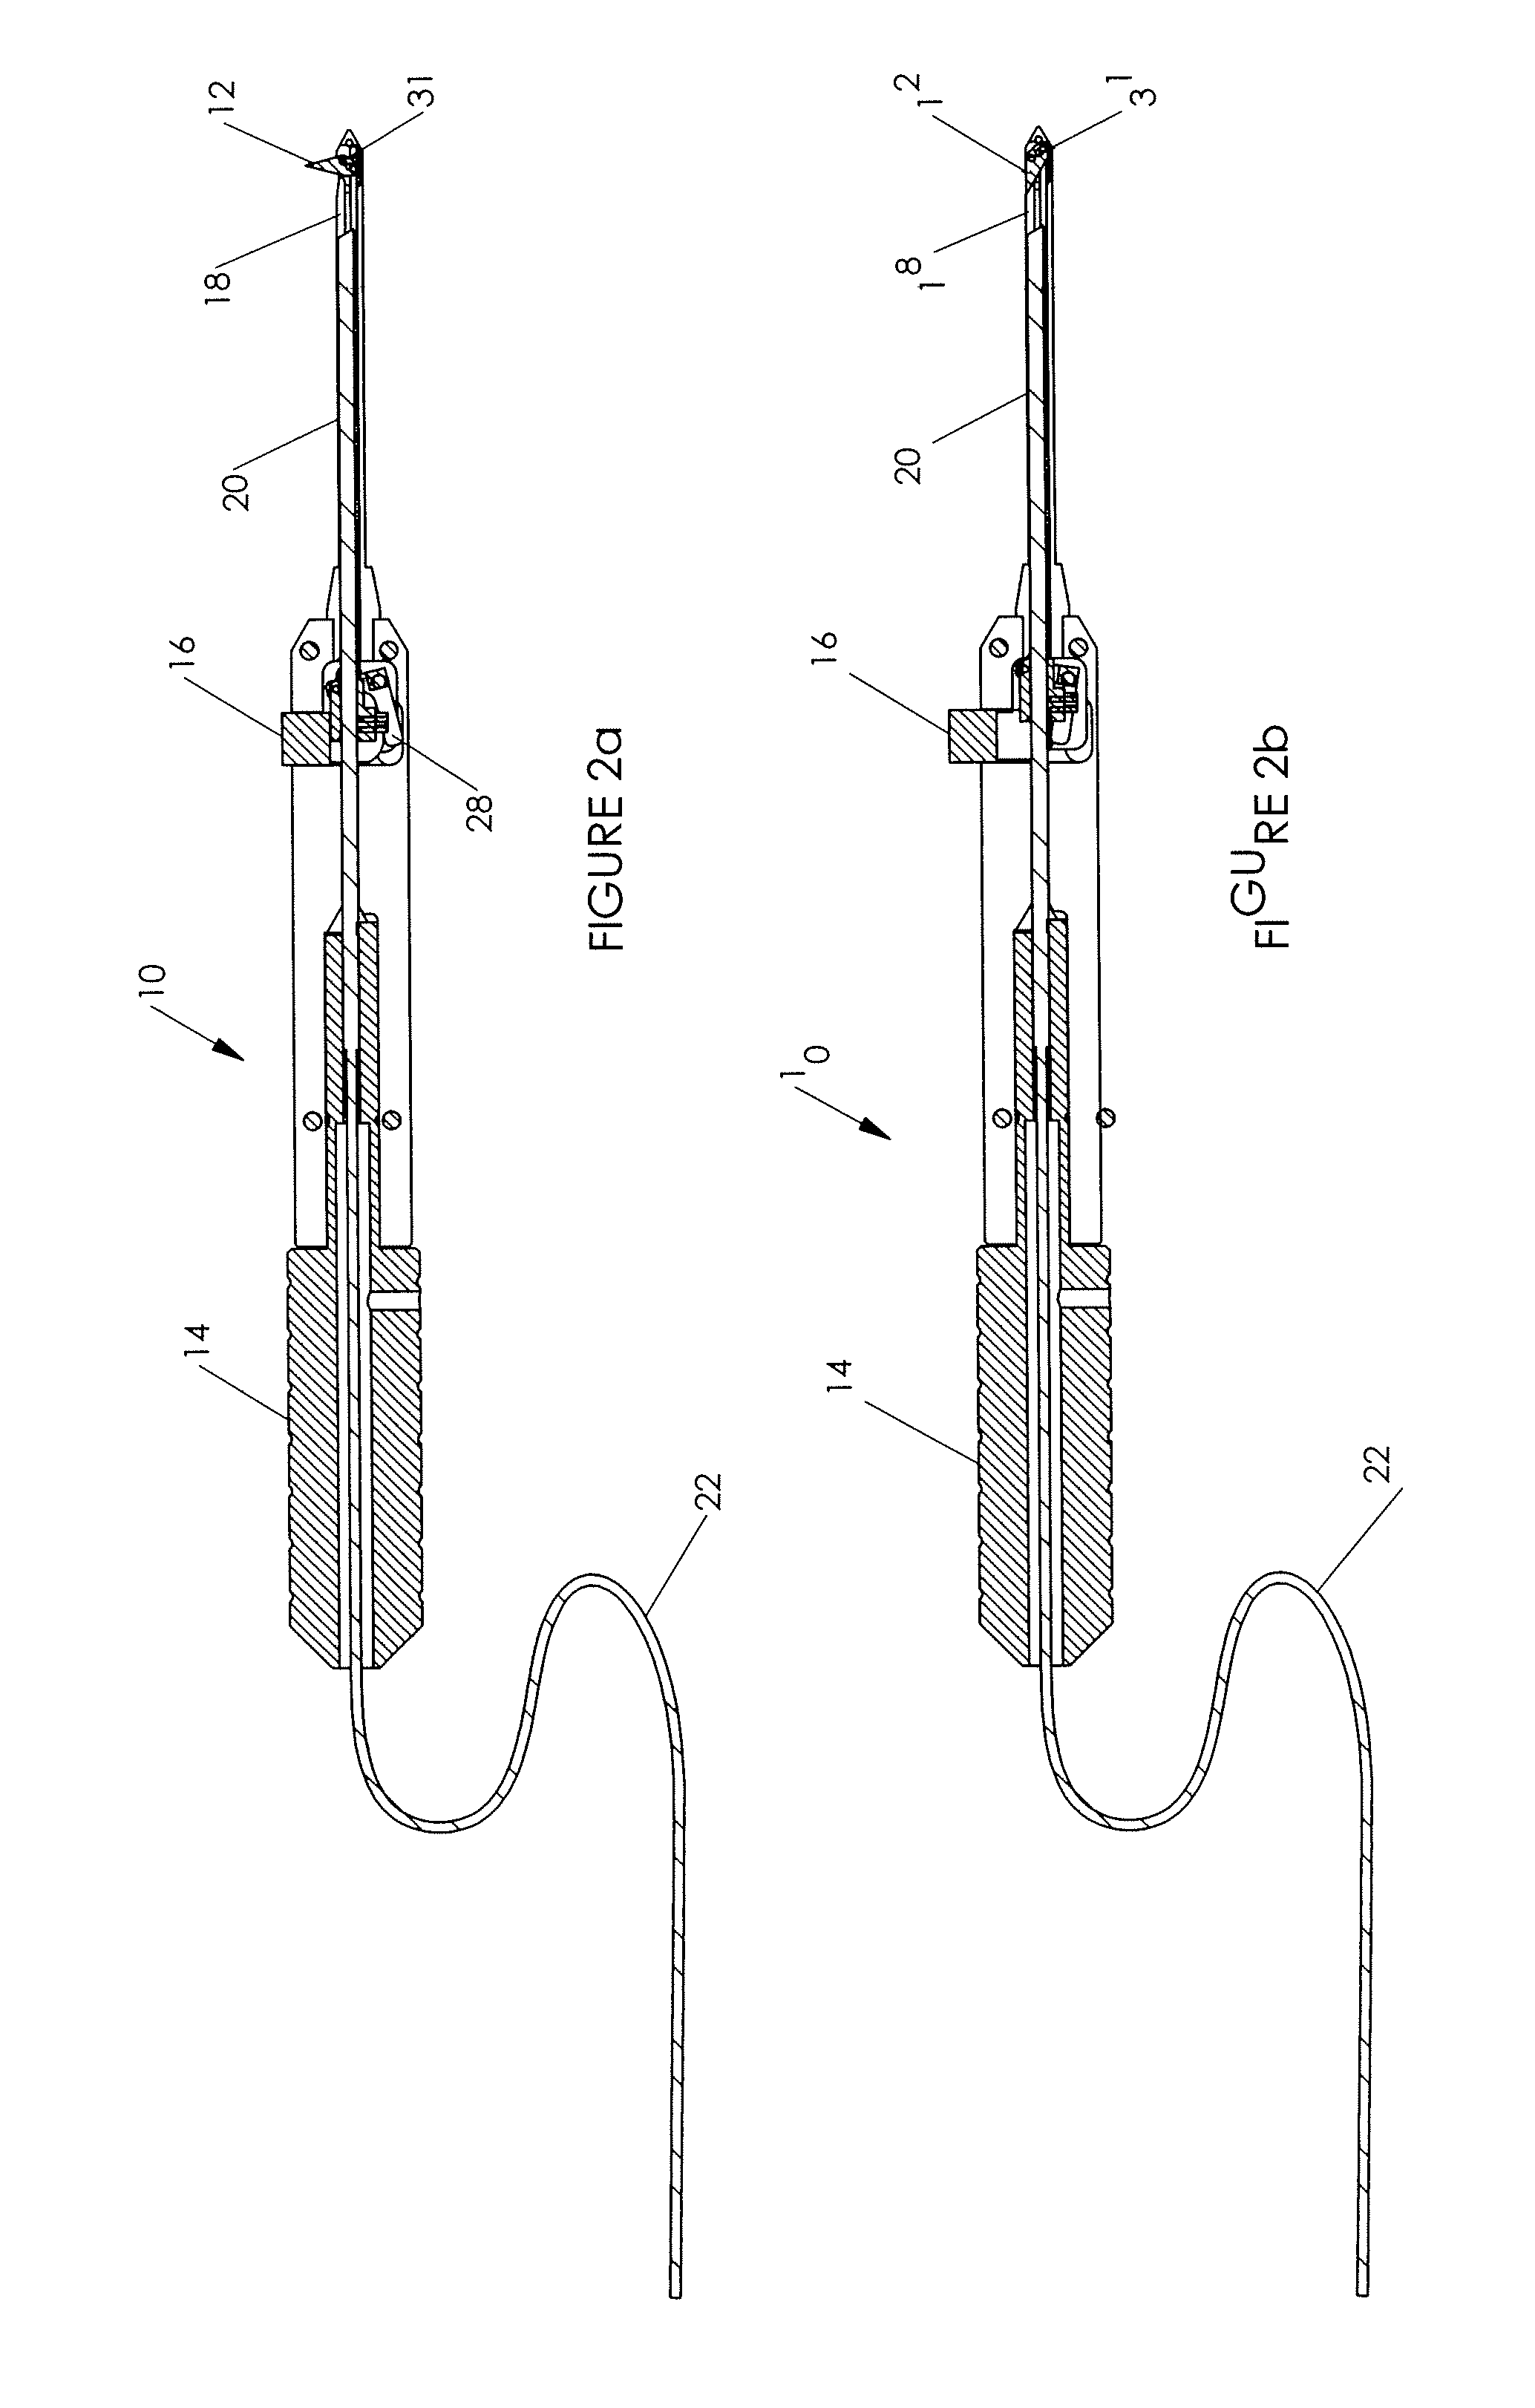 Endoscopic surgical tool with retractable blade for carpal tunnel release